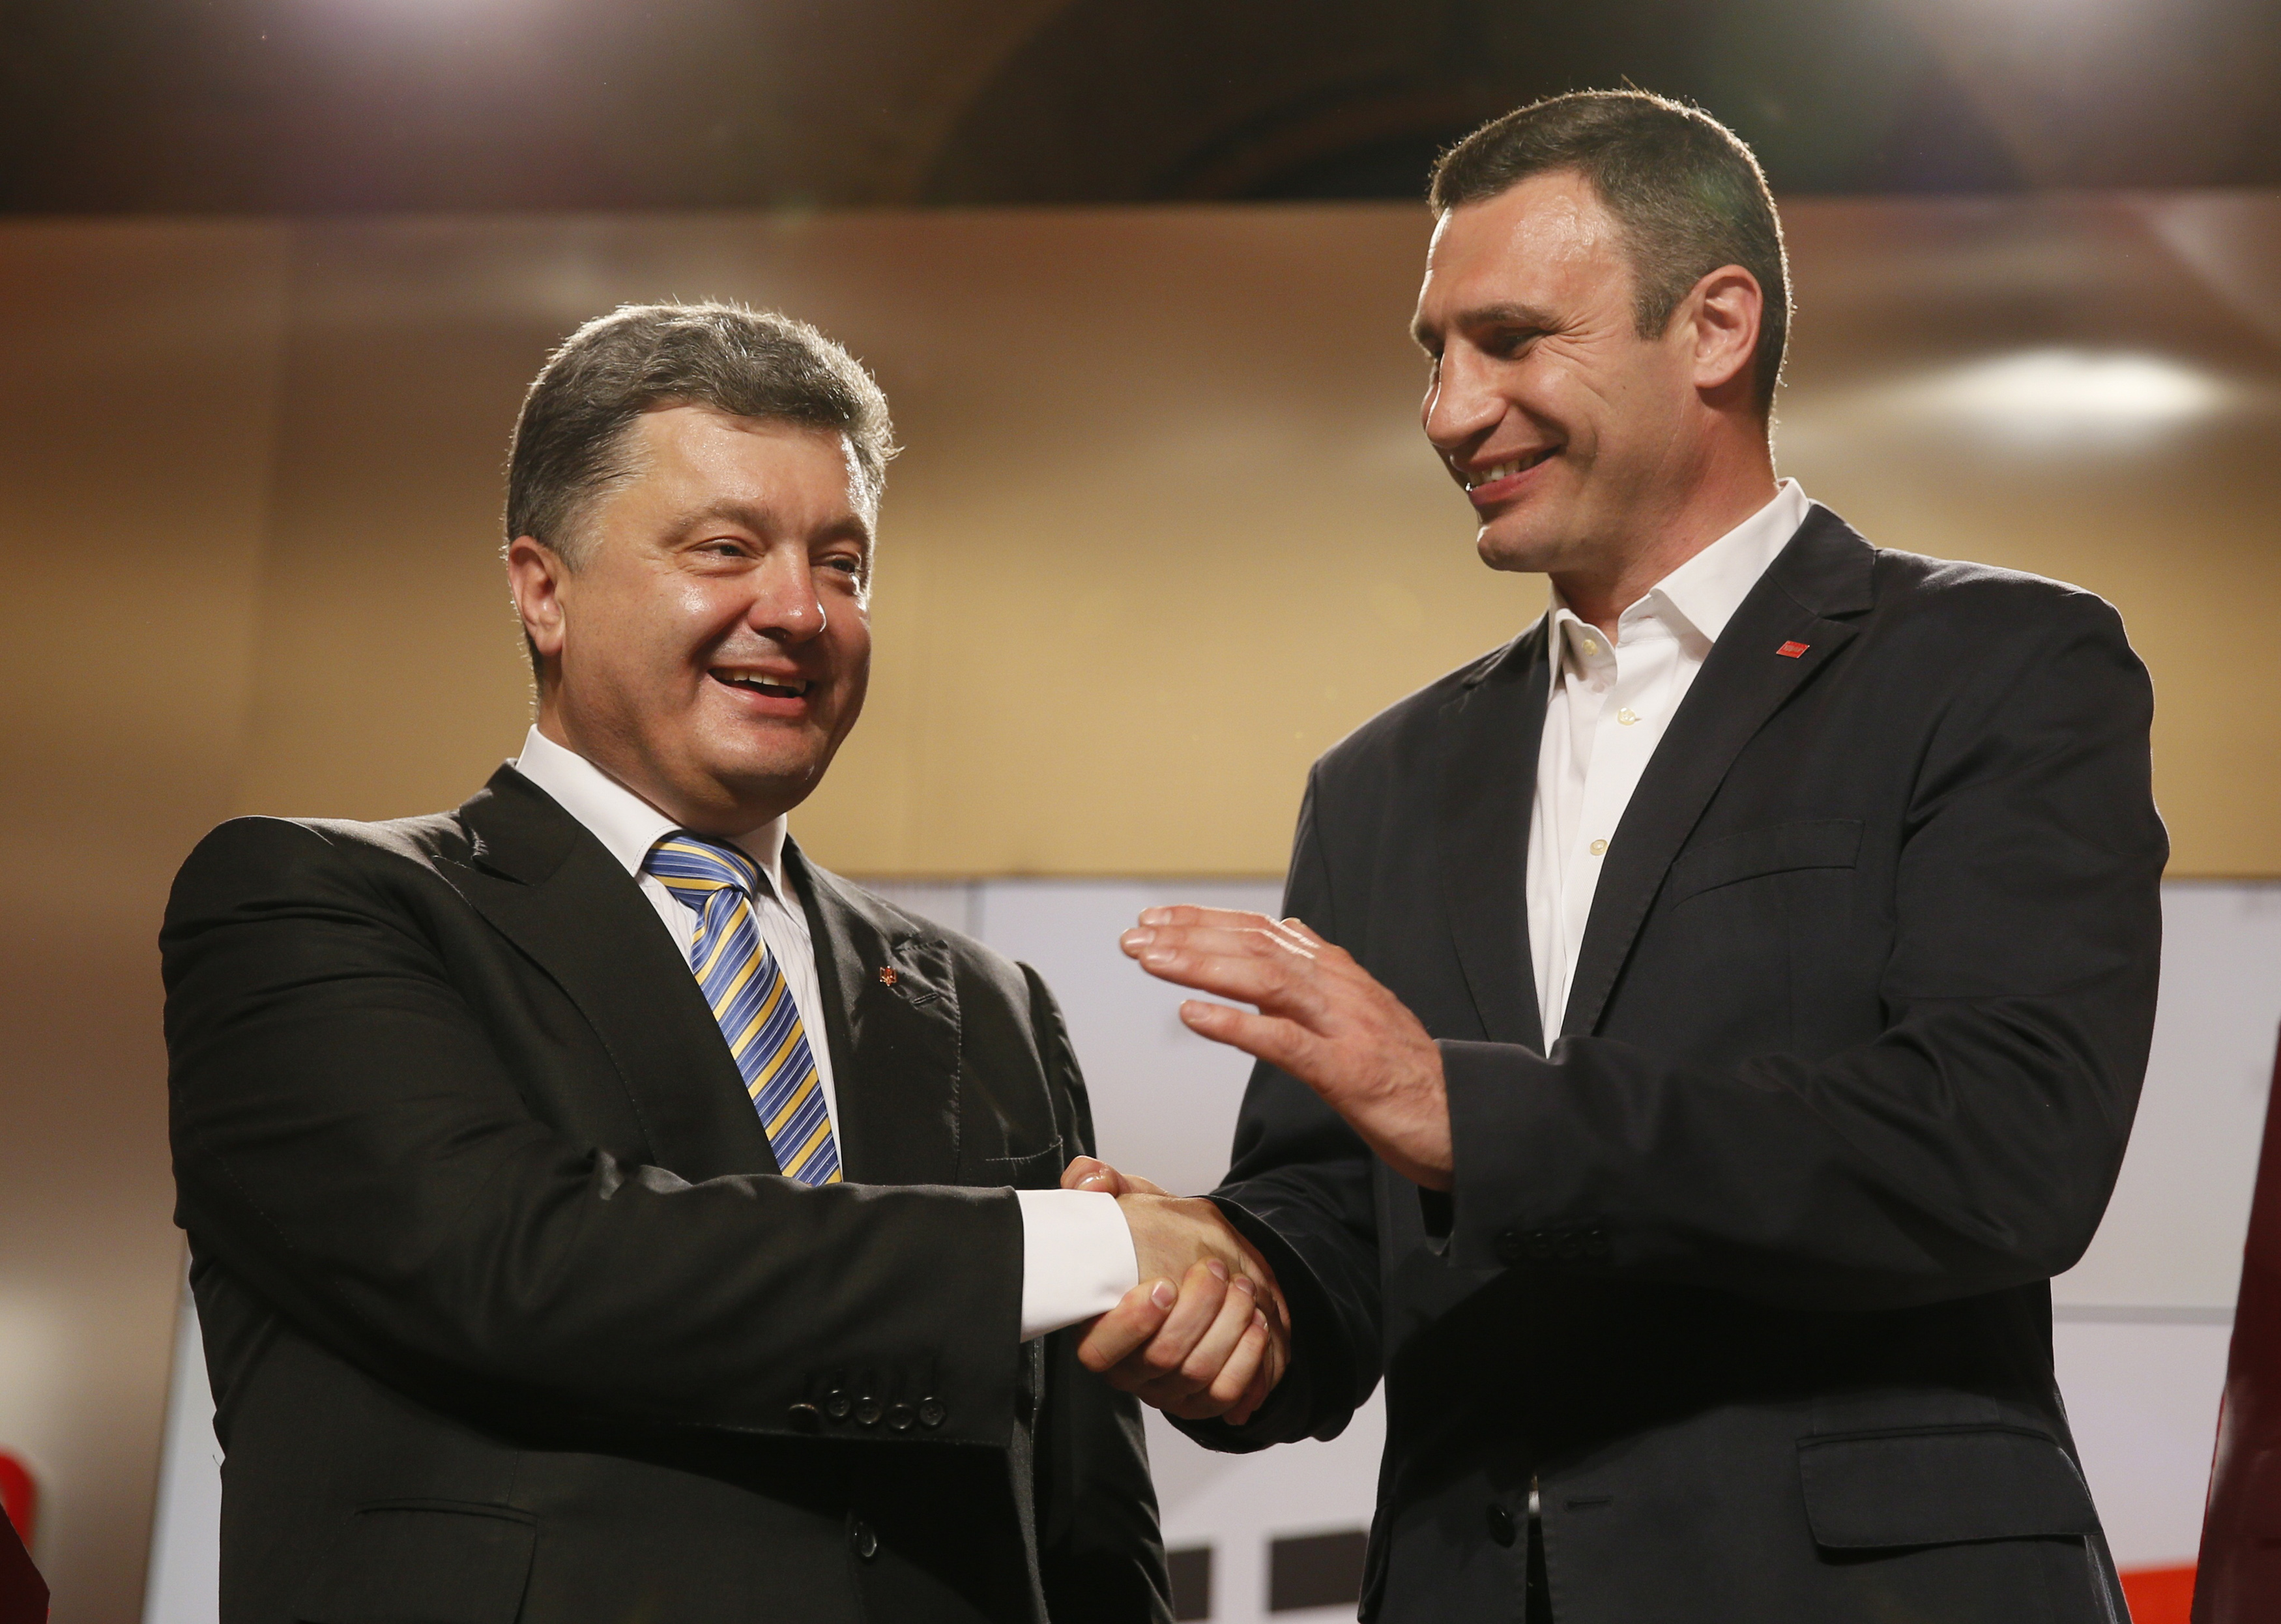 Presidential candidate Petro Poroshenko (left) and Kyiv mayoral candidate Vitali Klitschko celebrate after claiming victory in the May 25 elections. Klitschko withdrew from the presidential race and allied his UDAR party (the Ukrainian Democratic Alliance for Reform) with Poroshenko’s candidacy. Both men are seen as centrists. REUTERS/Gleb Garanich 